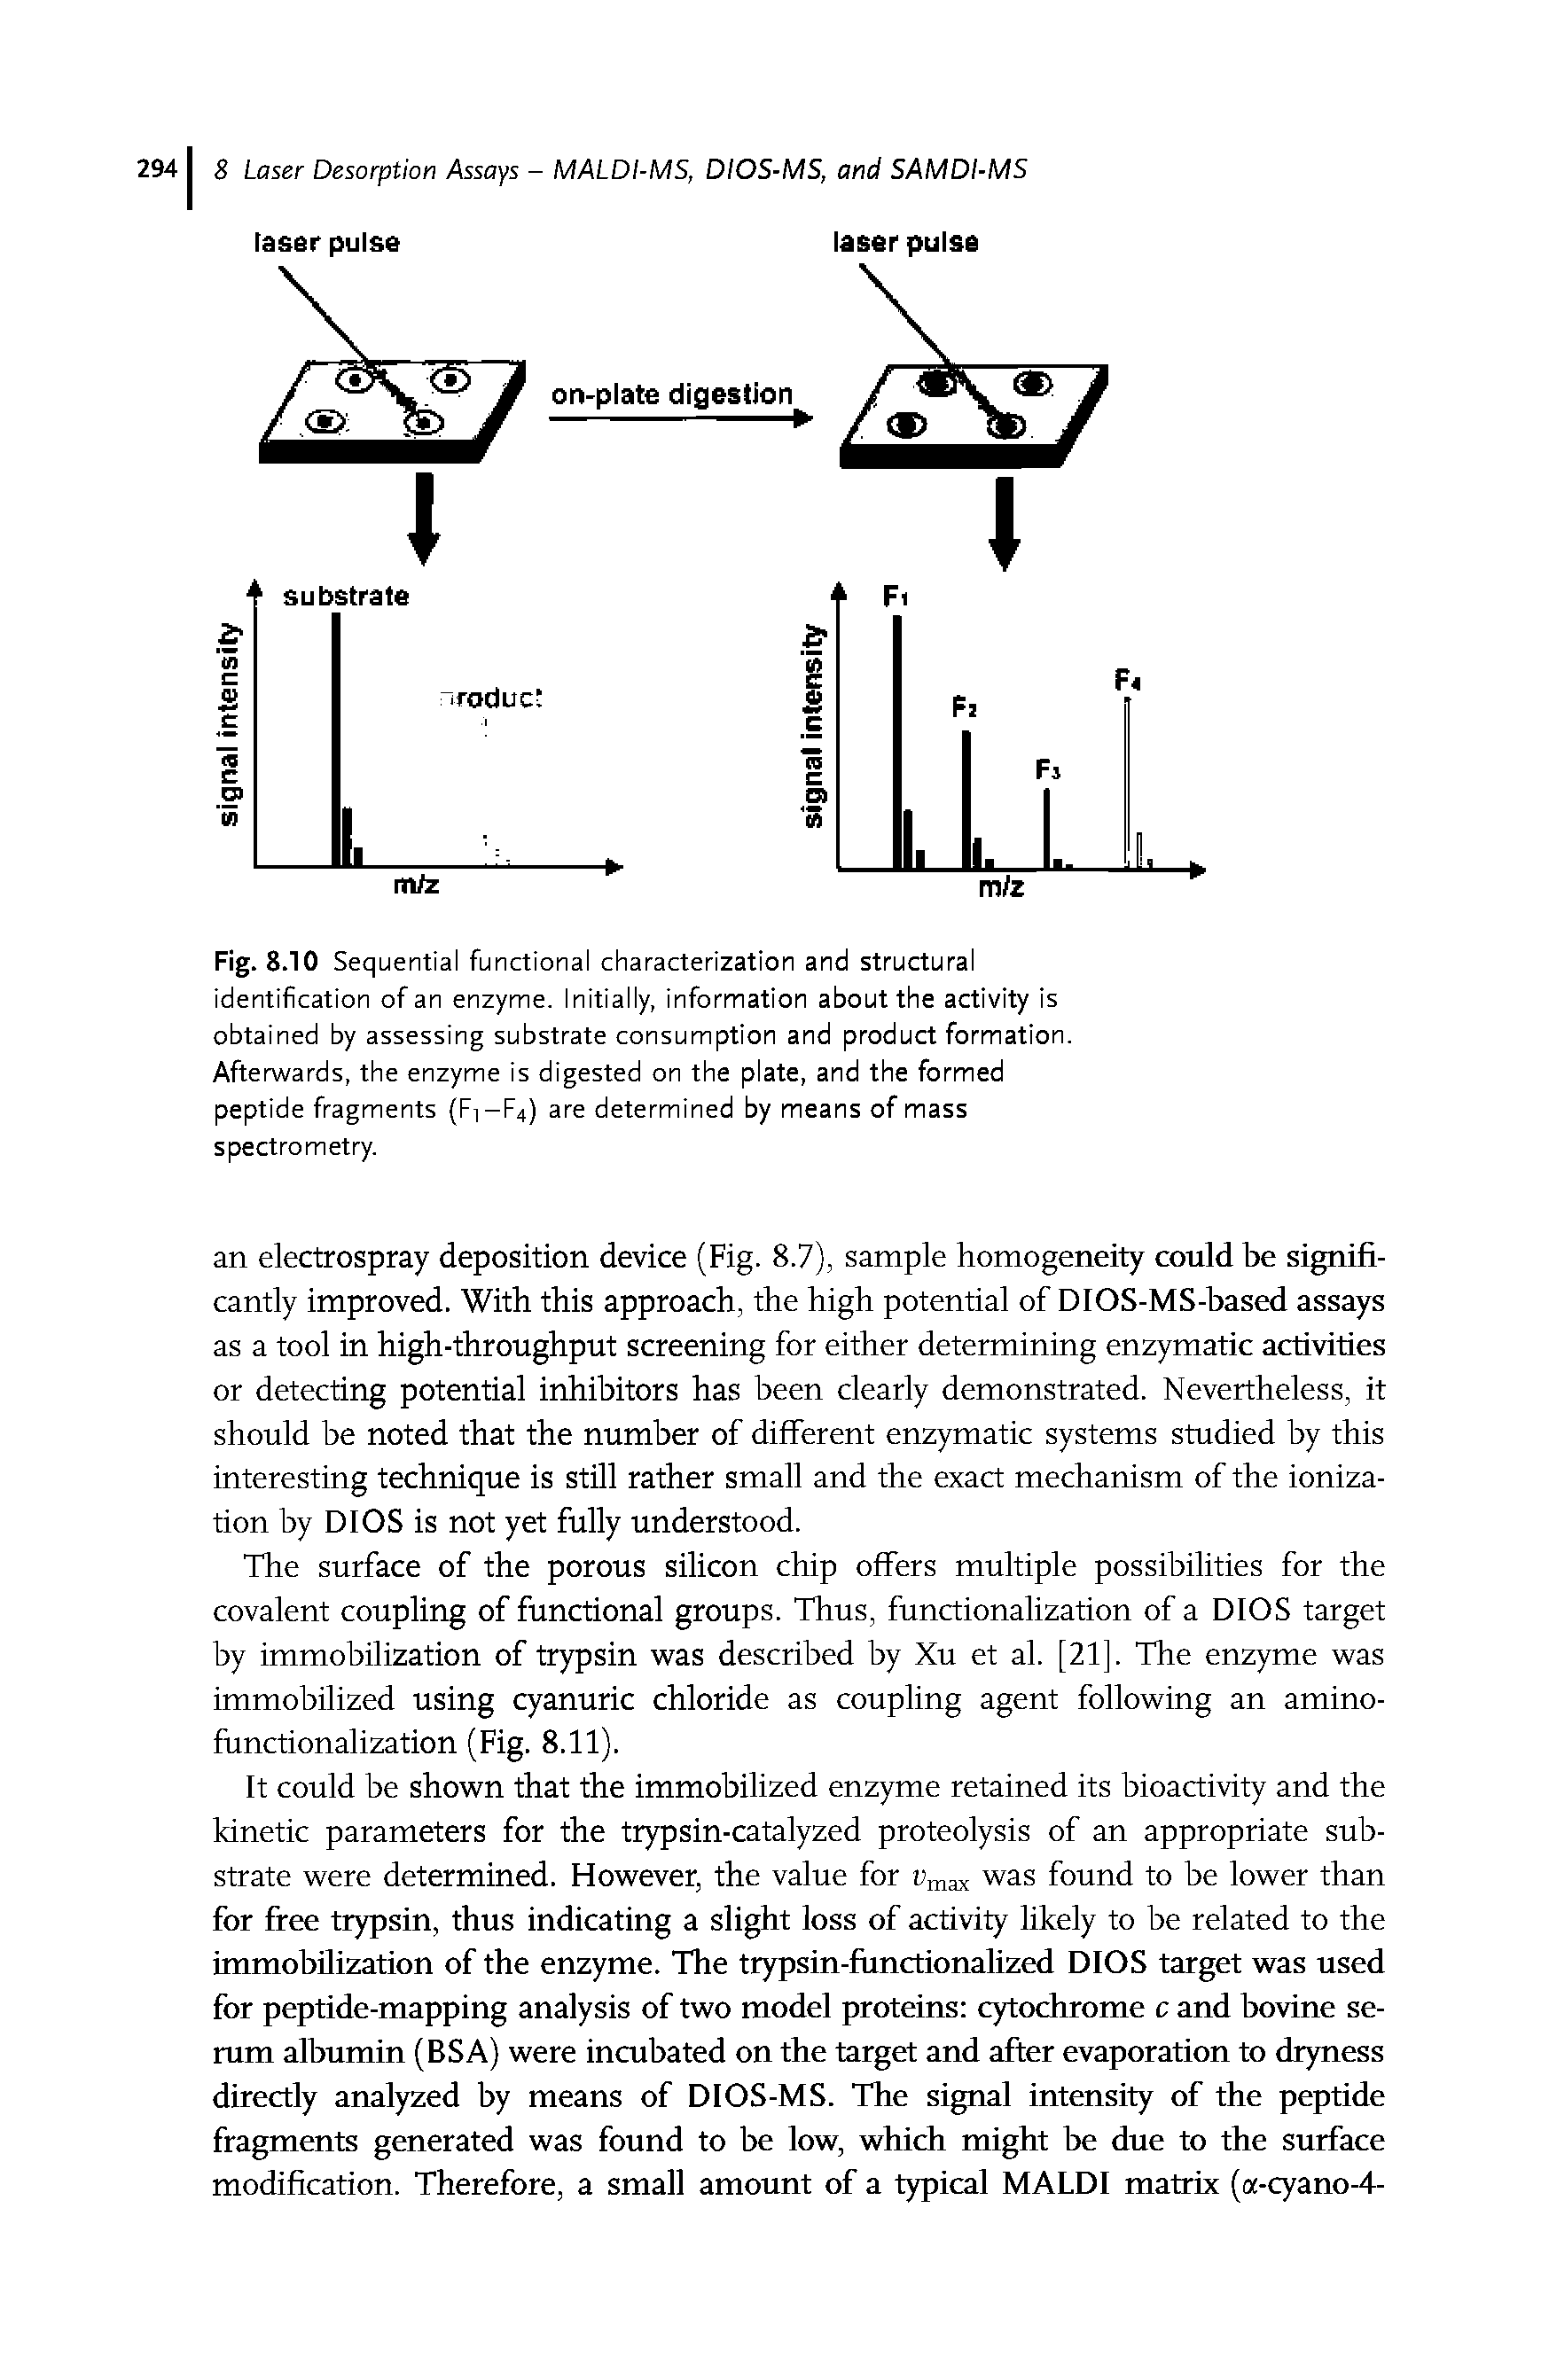 Fig. 8.10 Sequential functional characterization and structural identification of an enzyme. Initially, information about the activity is obtained by assessing substrate consumption and product formation. Afterwards, the enzyme is digested on the plate, and the formed peptide fragments (F1-F4) are determined by means of mass spectrometry.